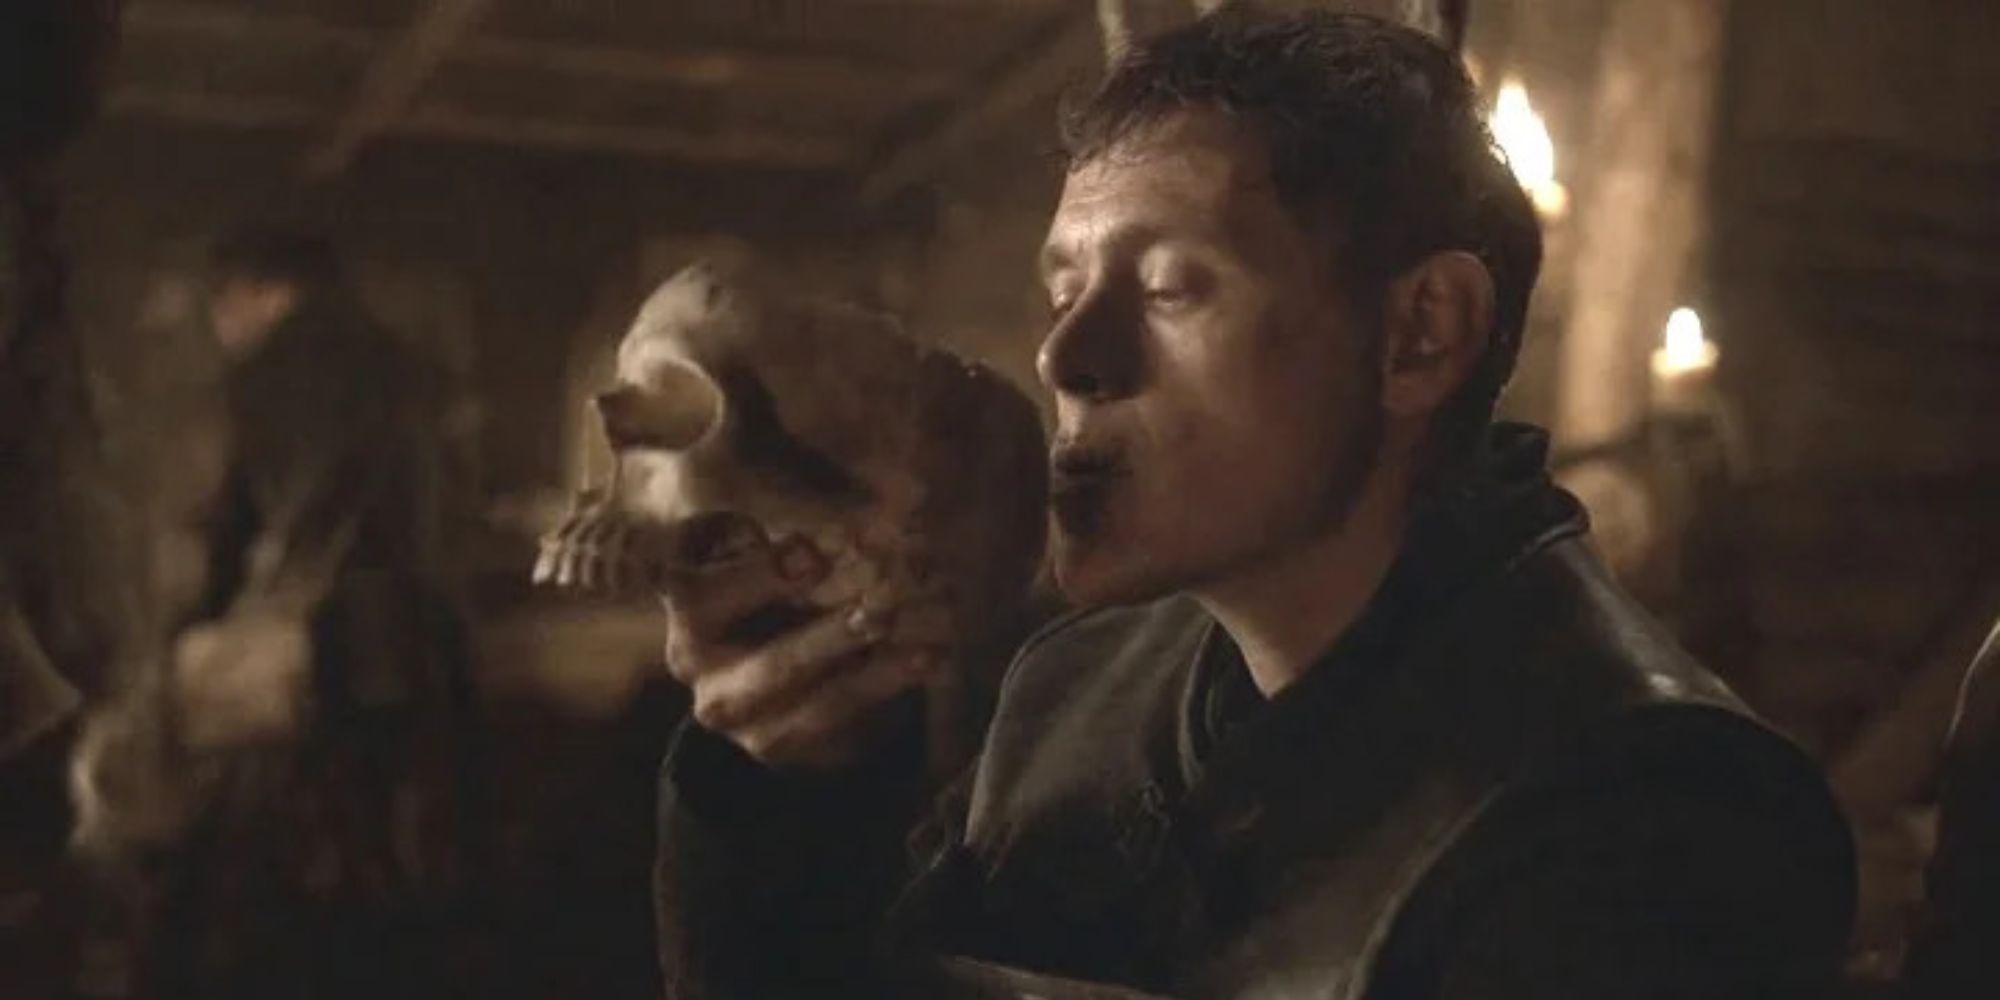 Close up on a man drinking from a skull